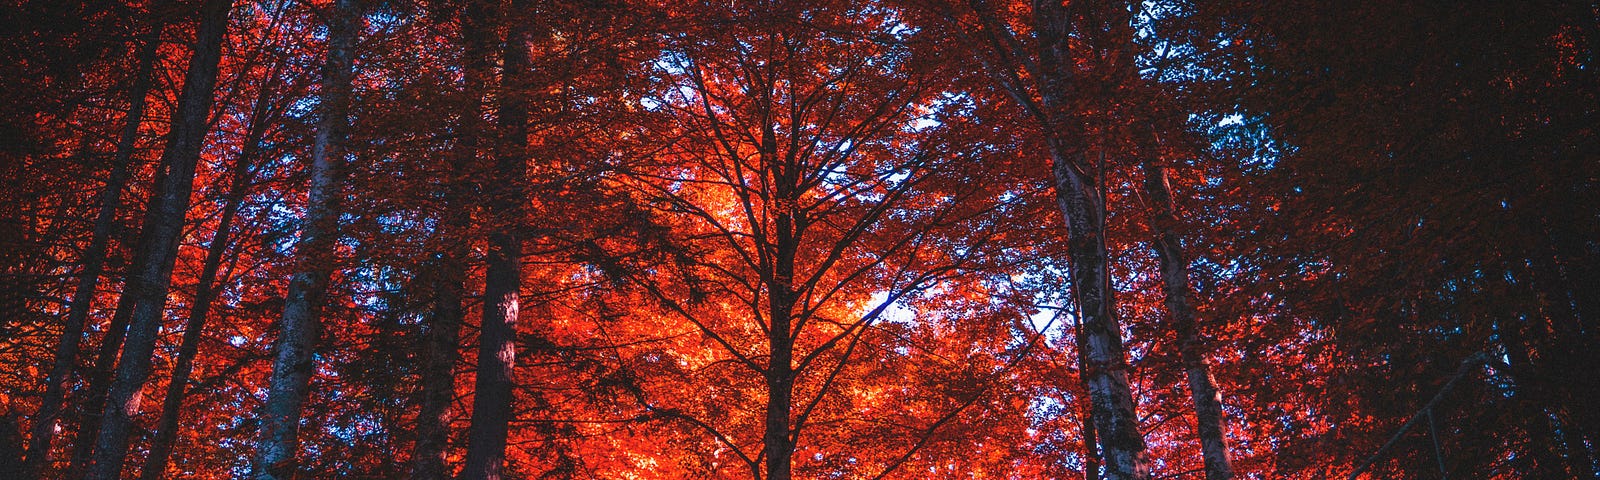 Red leaves on tall trees glow in the sunlight.